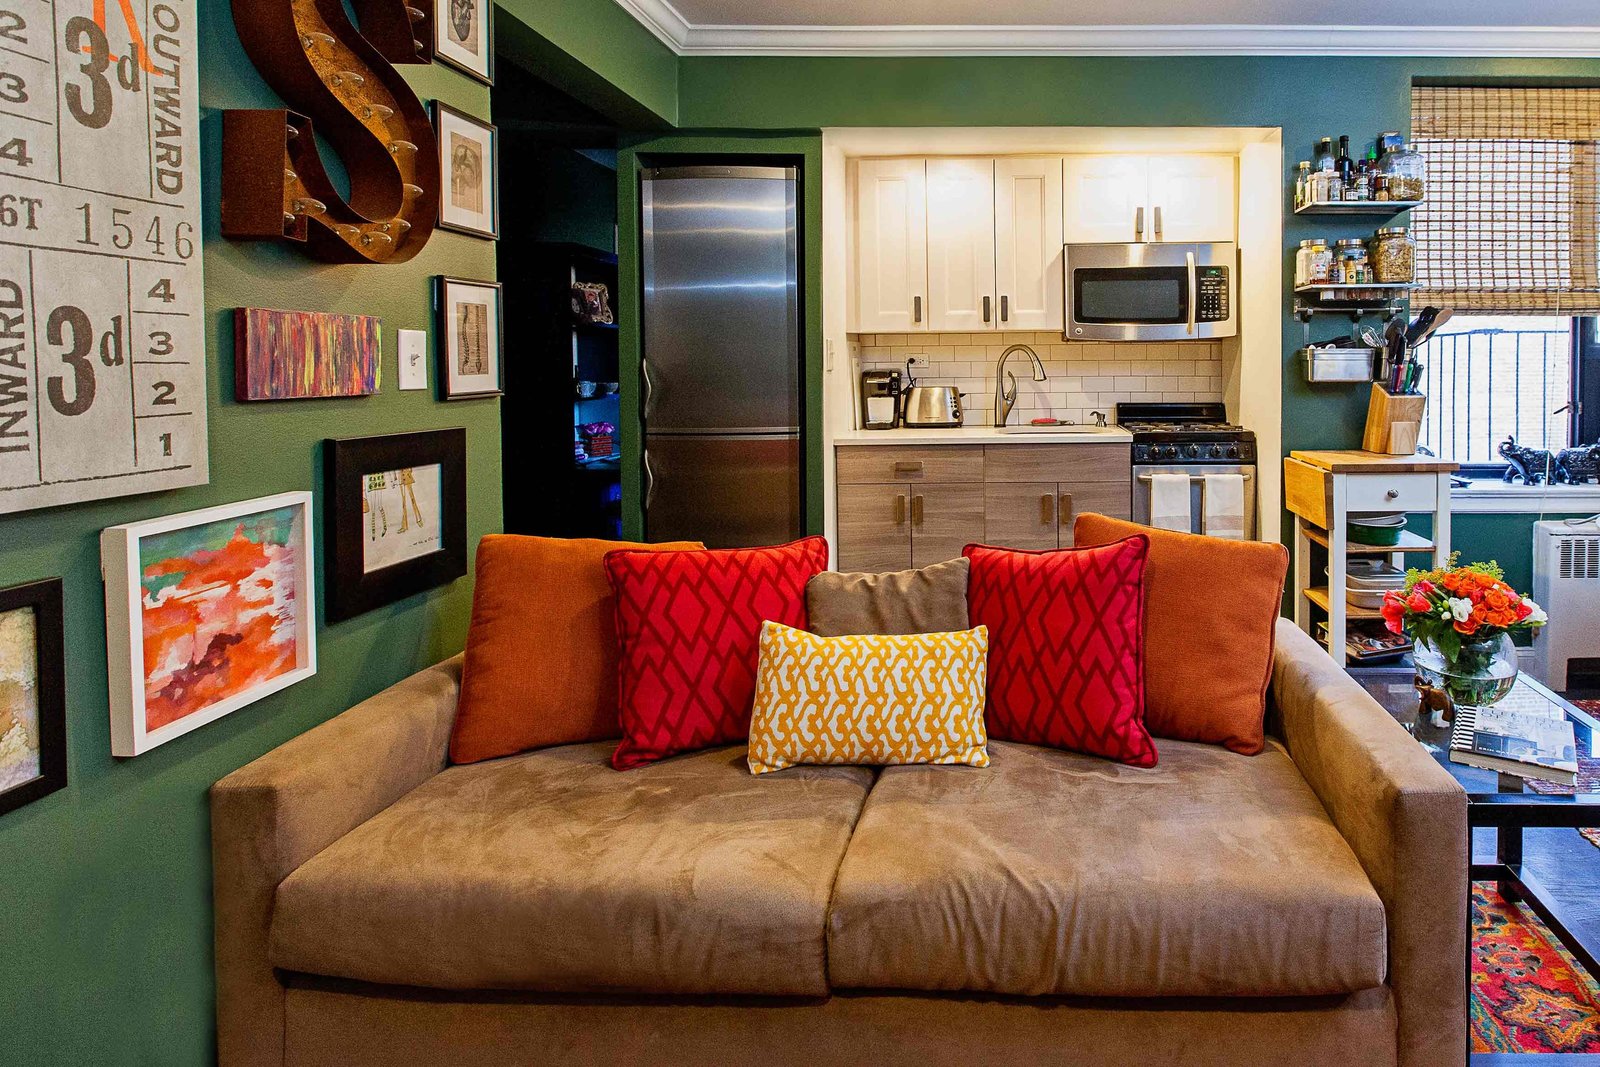 A brown couch in front of a studio apartment kitchen.